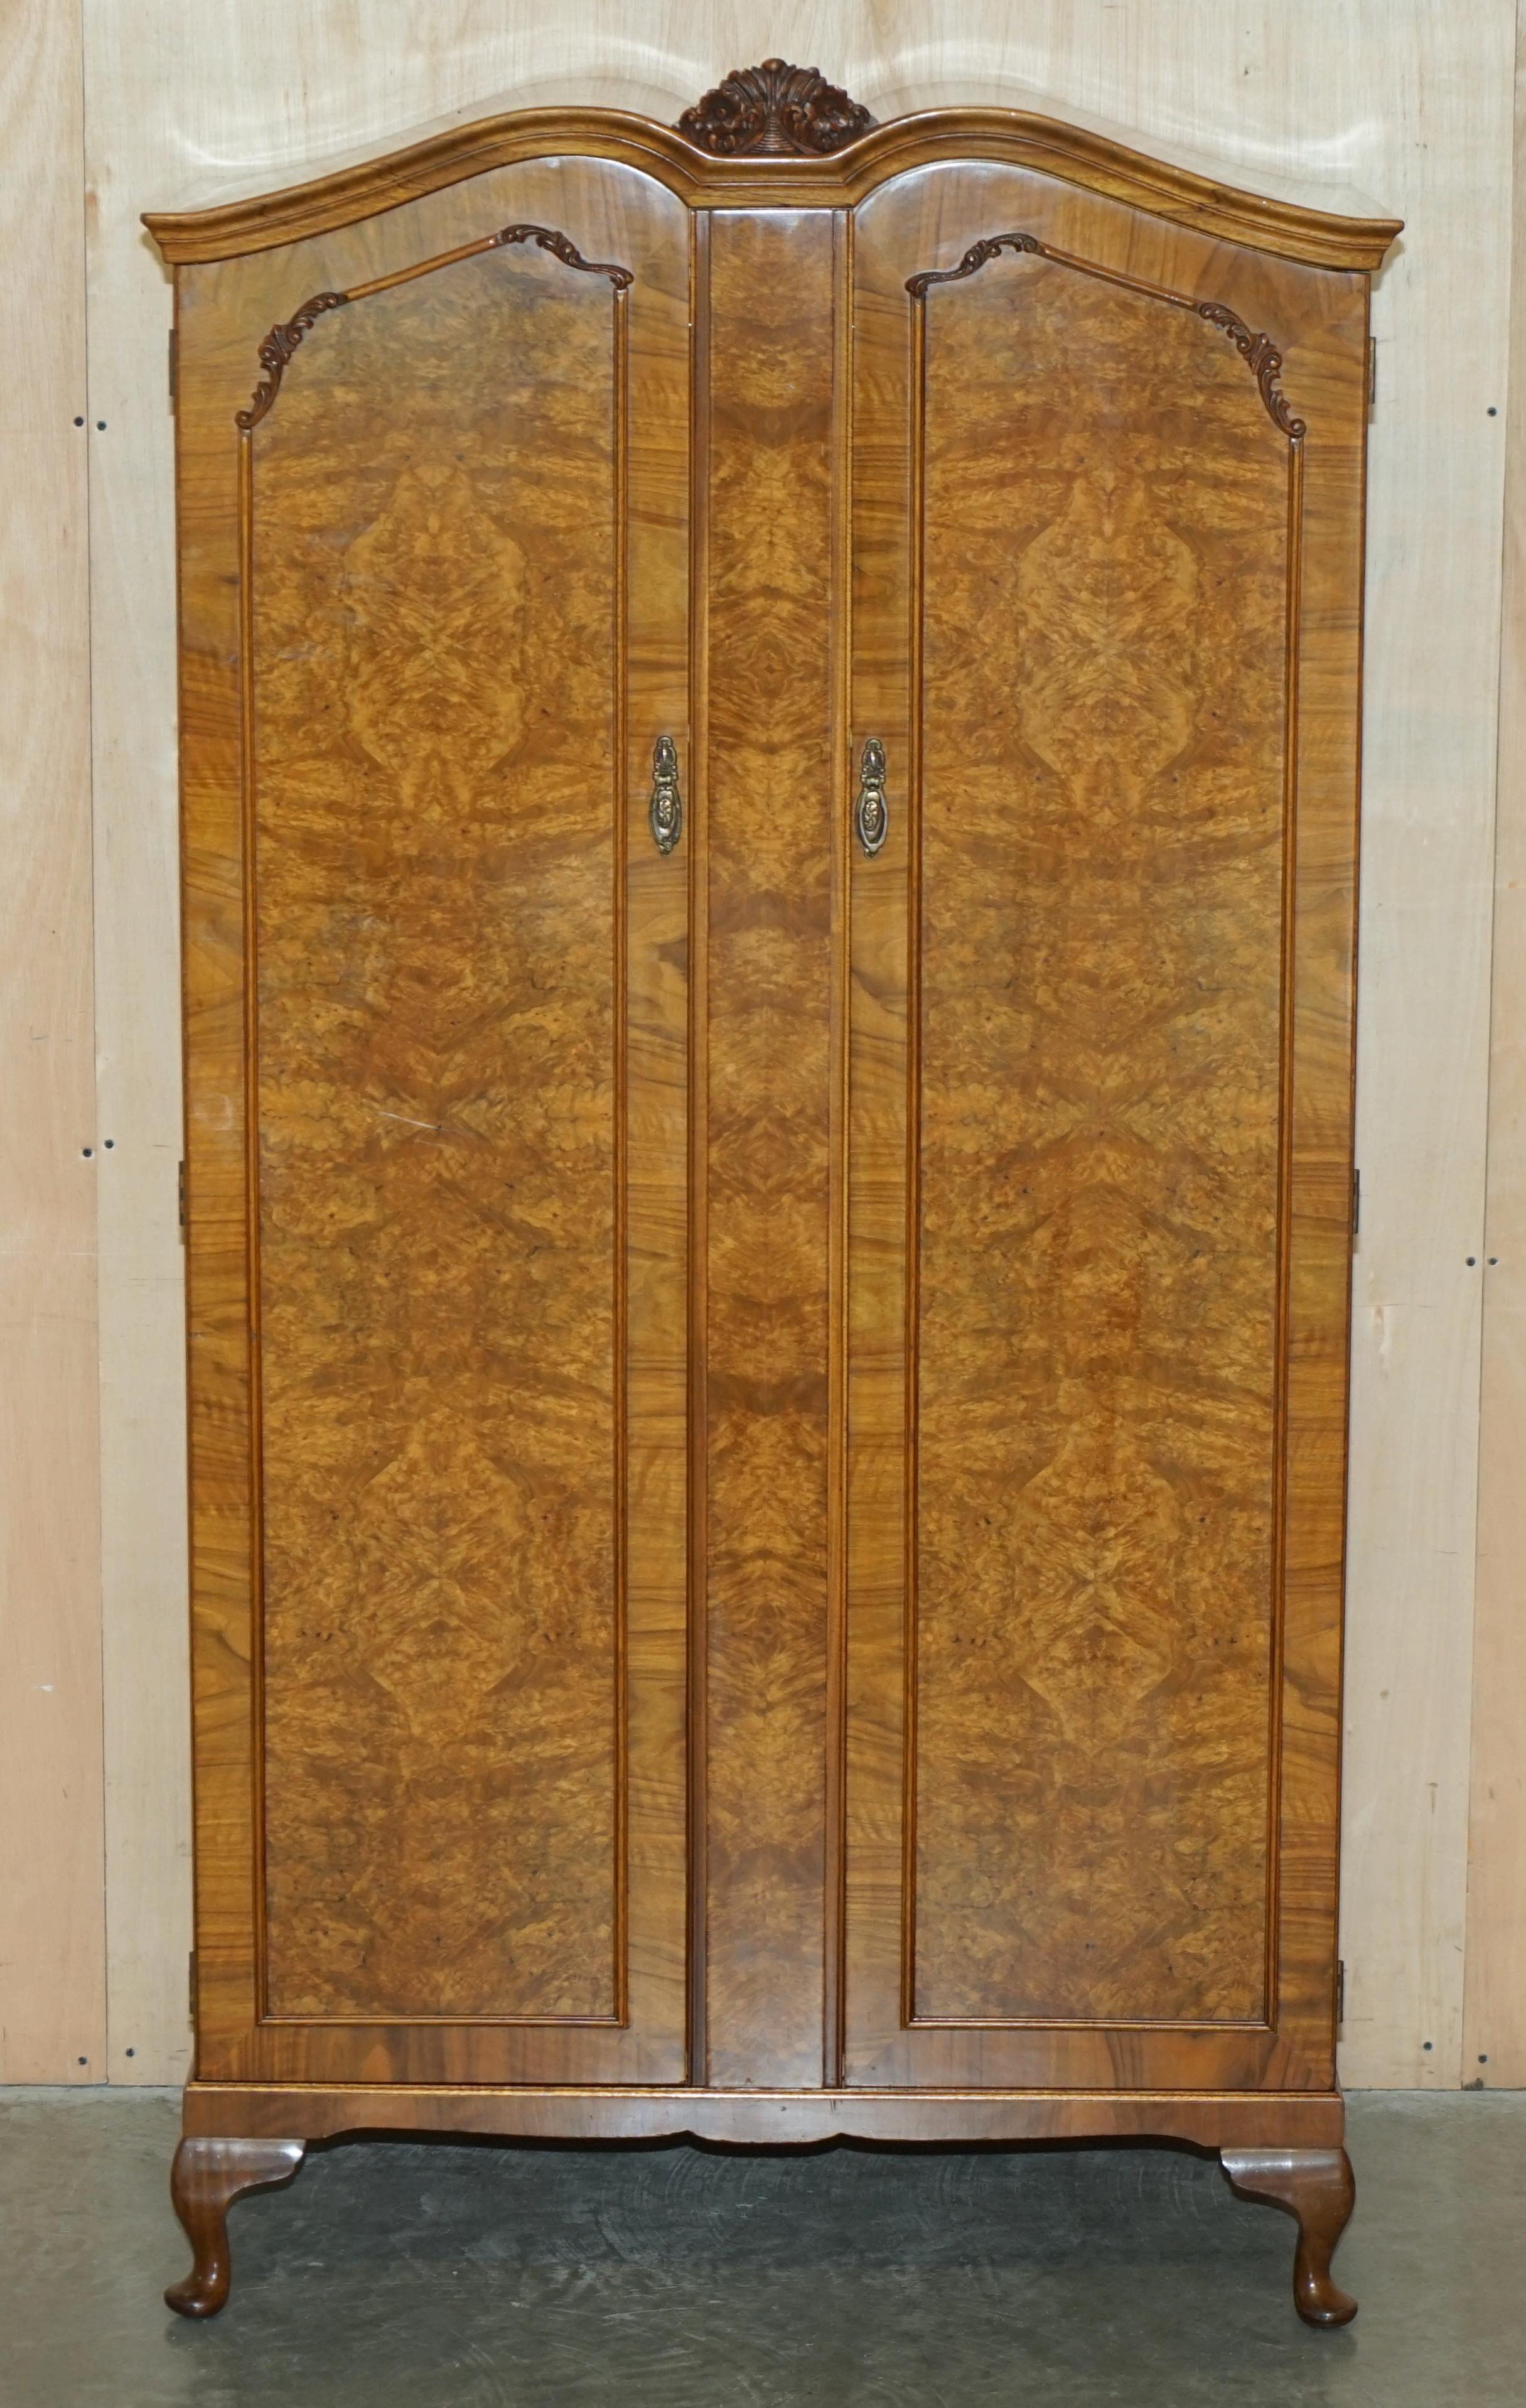 Royal House Antiques

Royal House Antiques is delighted to offer for sale this stunning, original circa 1940’s Alfred Cox Art Deco large Wardrobe with a compendium of drawers and shelves inside which is part of a suite

Please note the delivery fee